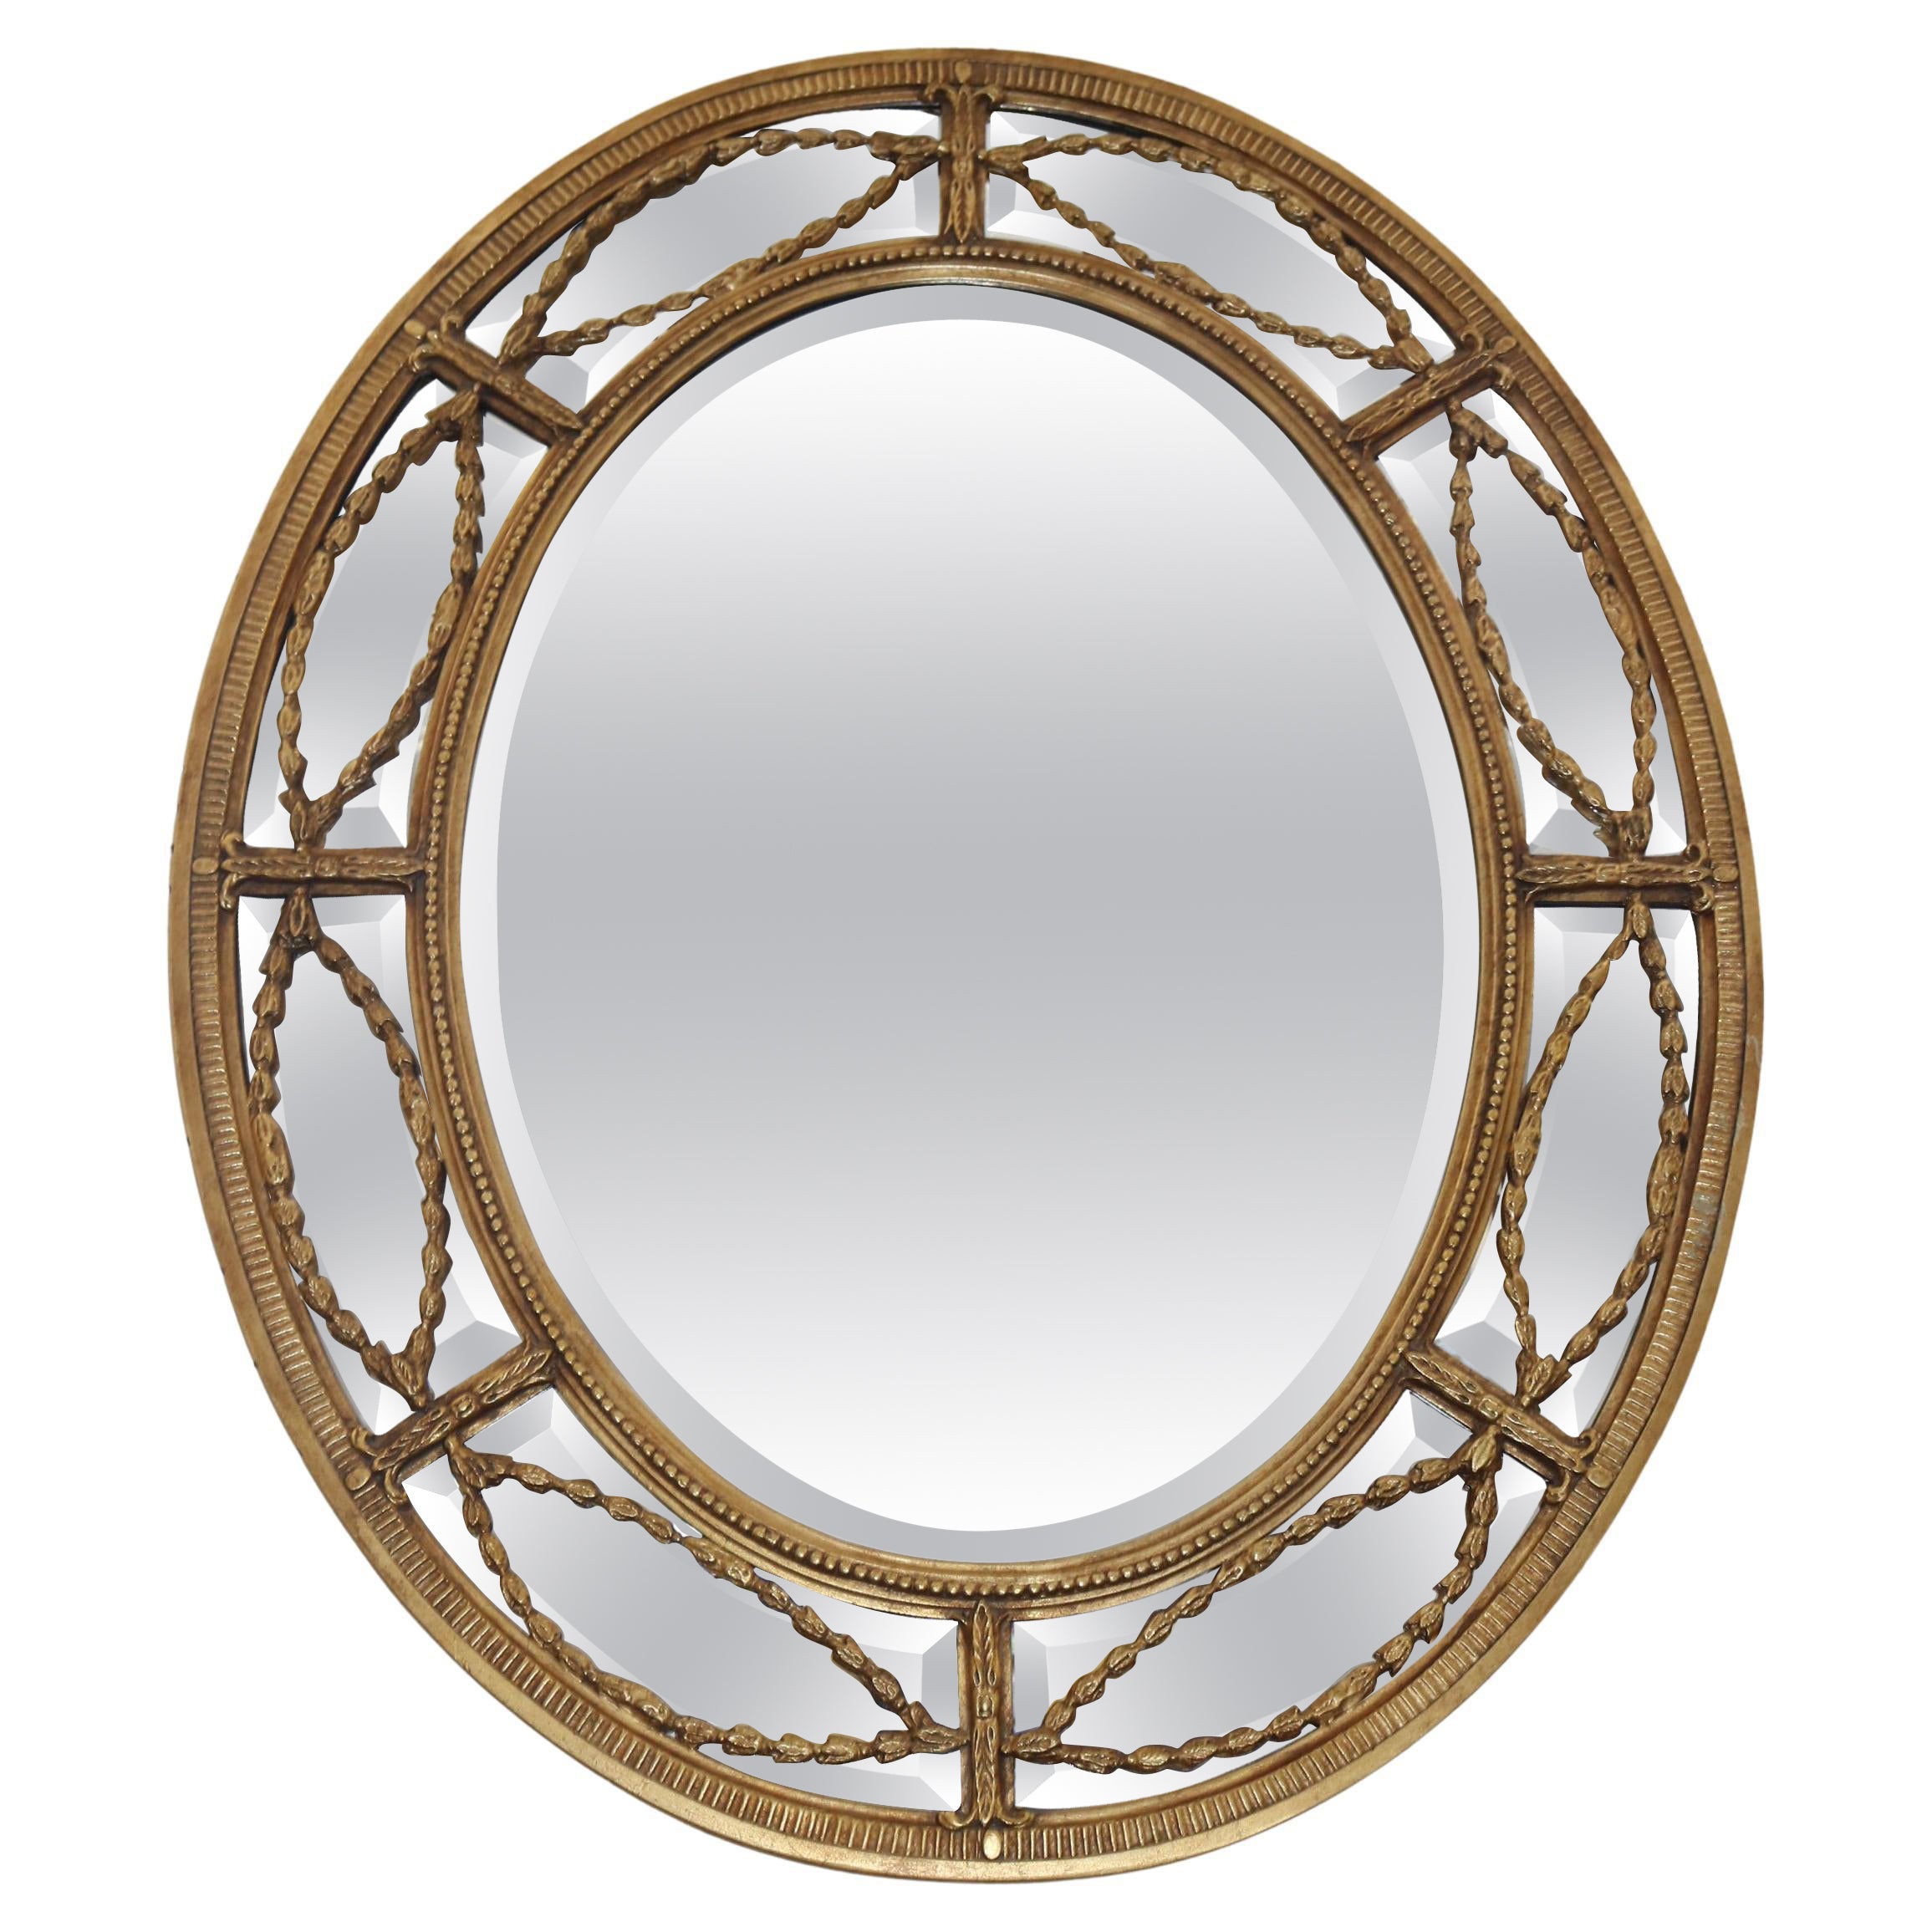 Friedman Brothers Beveled Mirror Model Adamesque Horizontal or Vertical For Sale